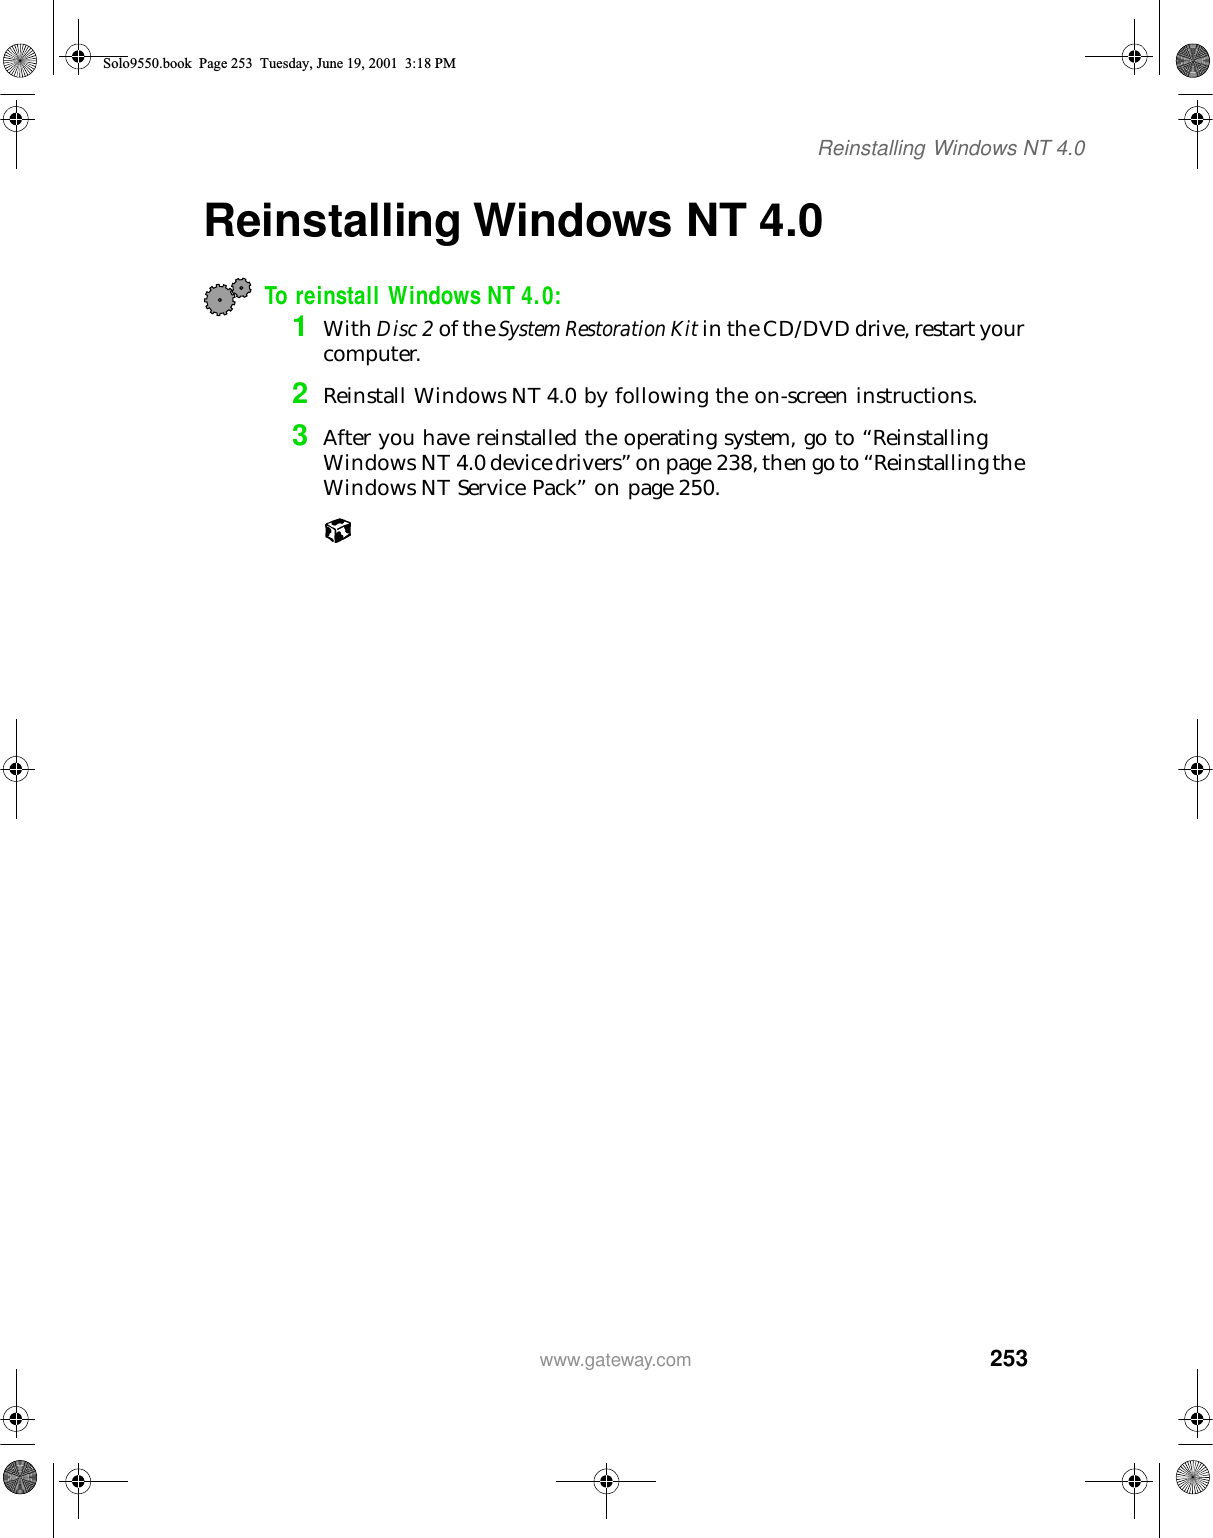 253Reinstalling Windows NT 4.0www.gateway.comReinstalling Windows NT 4.0 To reinstall Windows NT 4.0:1With Disc 2 of the System Restoration Kit in the CD/DVD drive, restart your computer.2Reinstall Windows NT 4.0 by following the on-screen instructions.3After you have reinstalled the operating system, go to “Reinstalling Windows NT 4.0 device drivers” on page 238, then go to “Reinstalling the Windows NT Service Pack” on page 250.Solo9550.book Page 253 Tuesday, June 19, 2001 3:18 PM